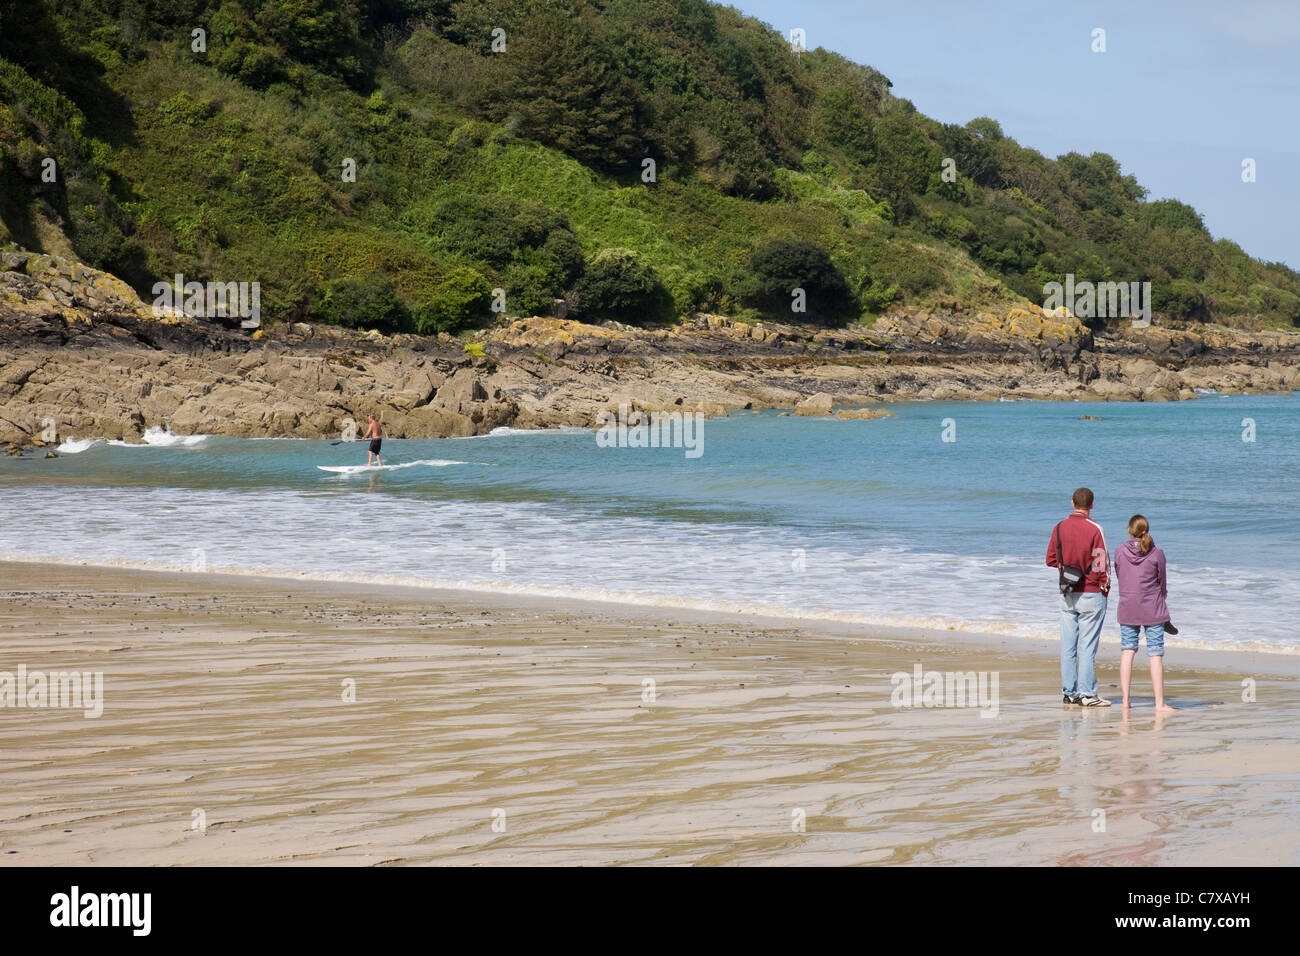 The sheltered beach at Carbis Bay near St Ives in Cornwall, England. Stock Photo